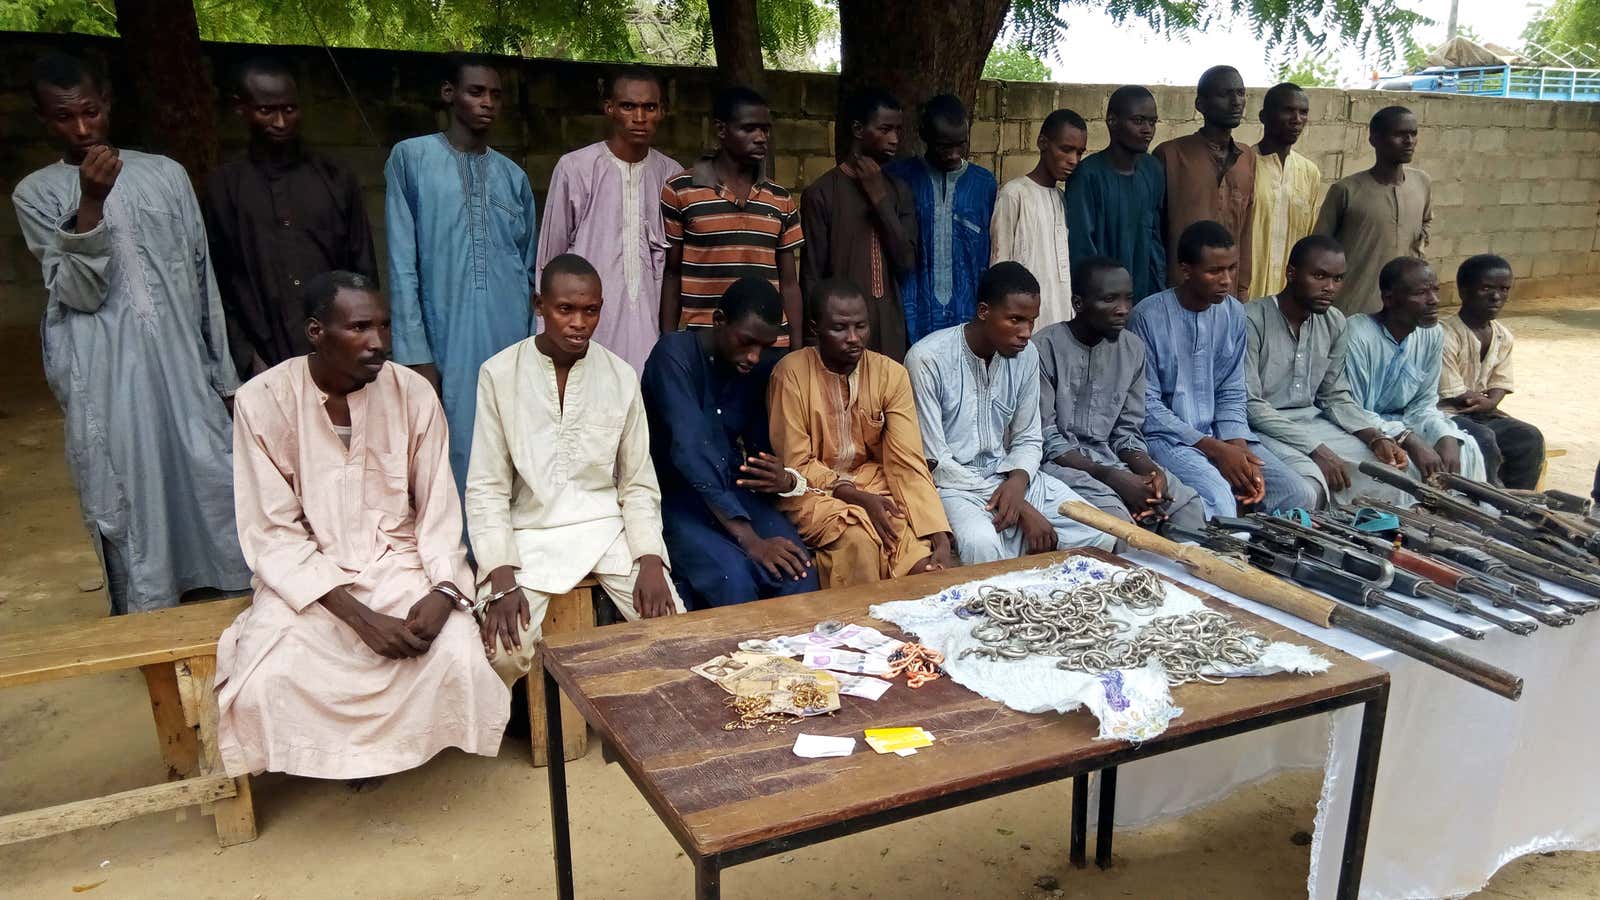 Suspected members of Islamist militant group Boko Haram are pictured after being arrested in Maiduguri, Nigeria July 18, 2018.